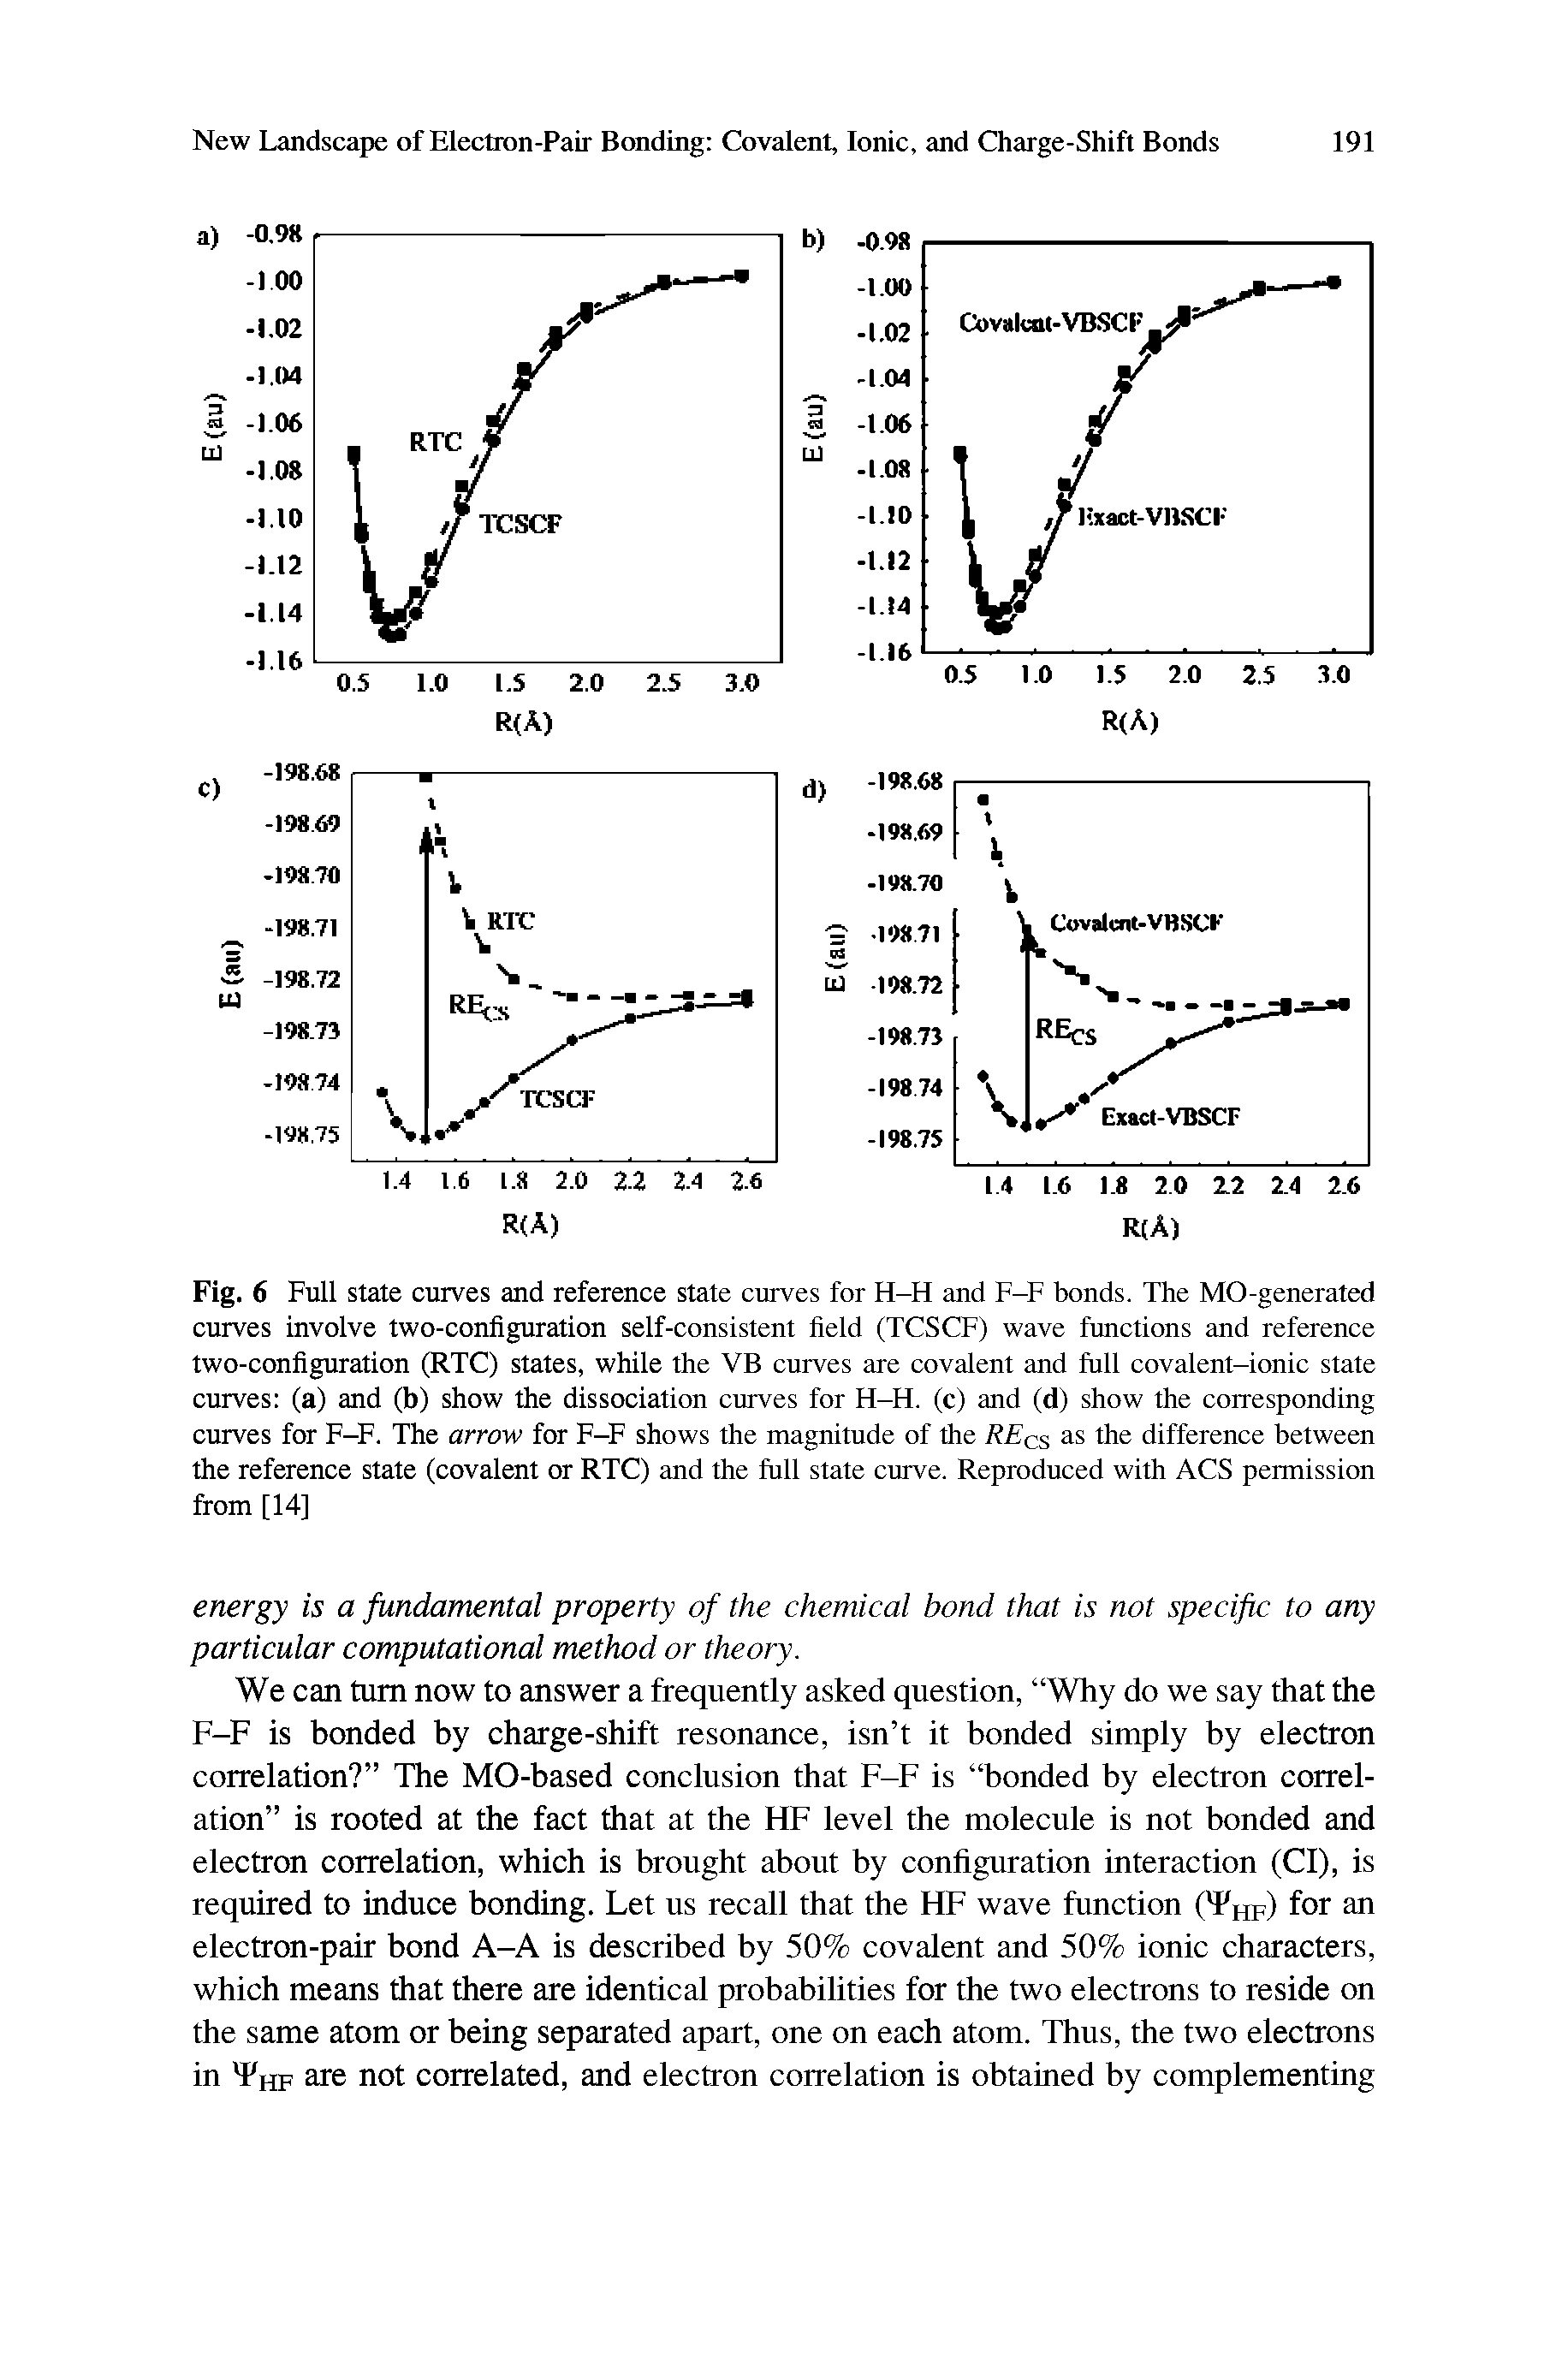 Fig. 6 Full state curves and reference state curves for H-H and F-F bonds. The MO-generated curves Involve two-configuration self-consistent field (TCSCF) wave functions and reference two-configuration (RTC) states, while the VB curves are covalent and full covalent-ionic state curves (a) and (b) show the dissociation curves for H-H. (c) and (d) show the corresponding curves for F-F. The arrow for F-F shows the magnitude of the REqs as the difference between the reference state (covalent or RTC) and the full state curve. Reproduced with ACS permission from [14]...